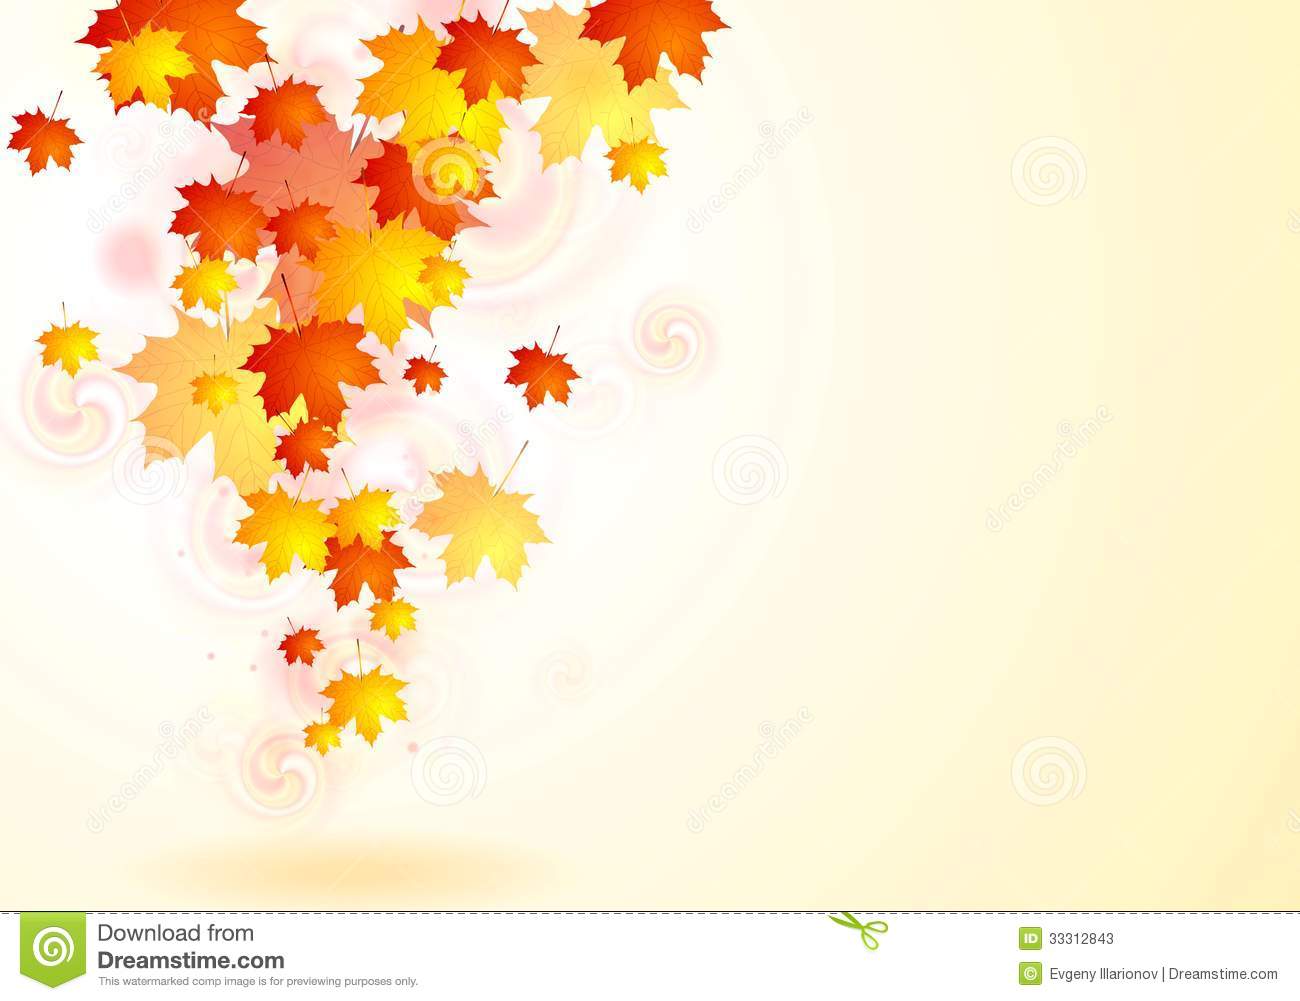 Autumn Leaves Falling Vector